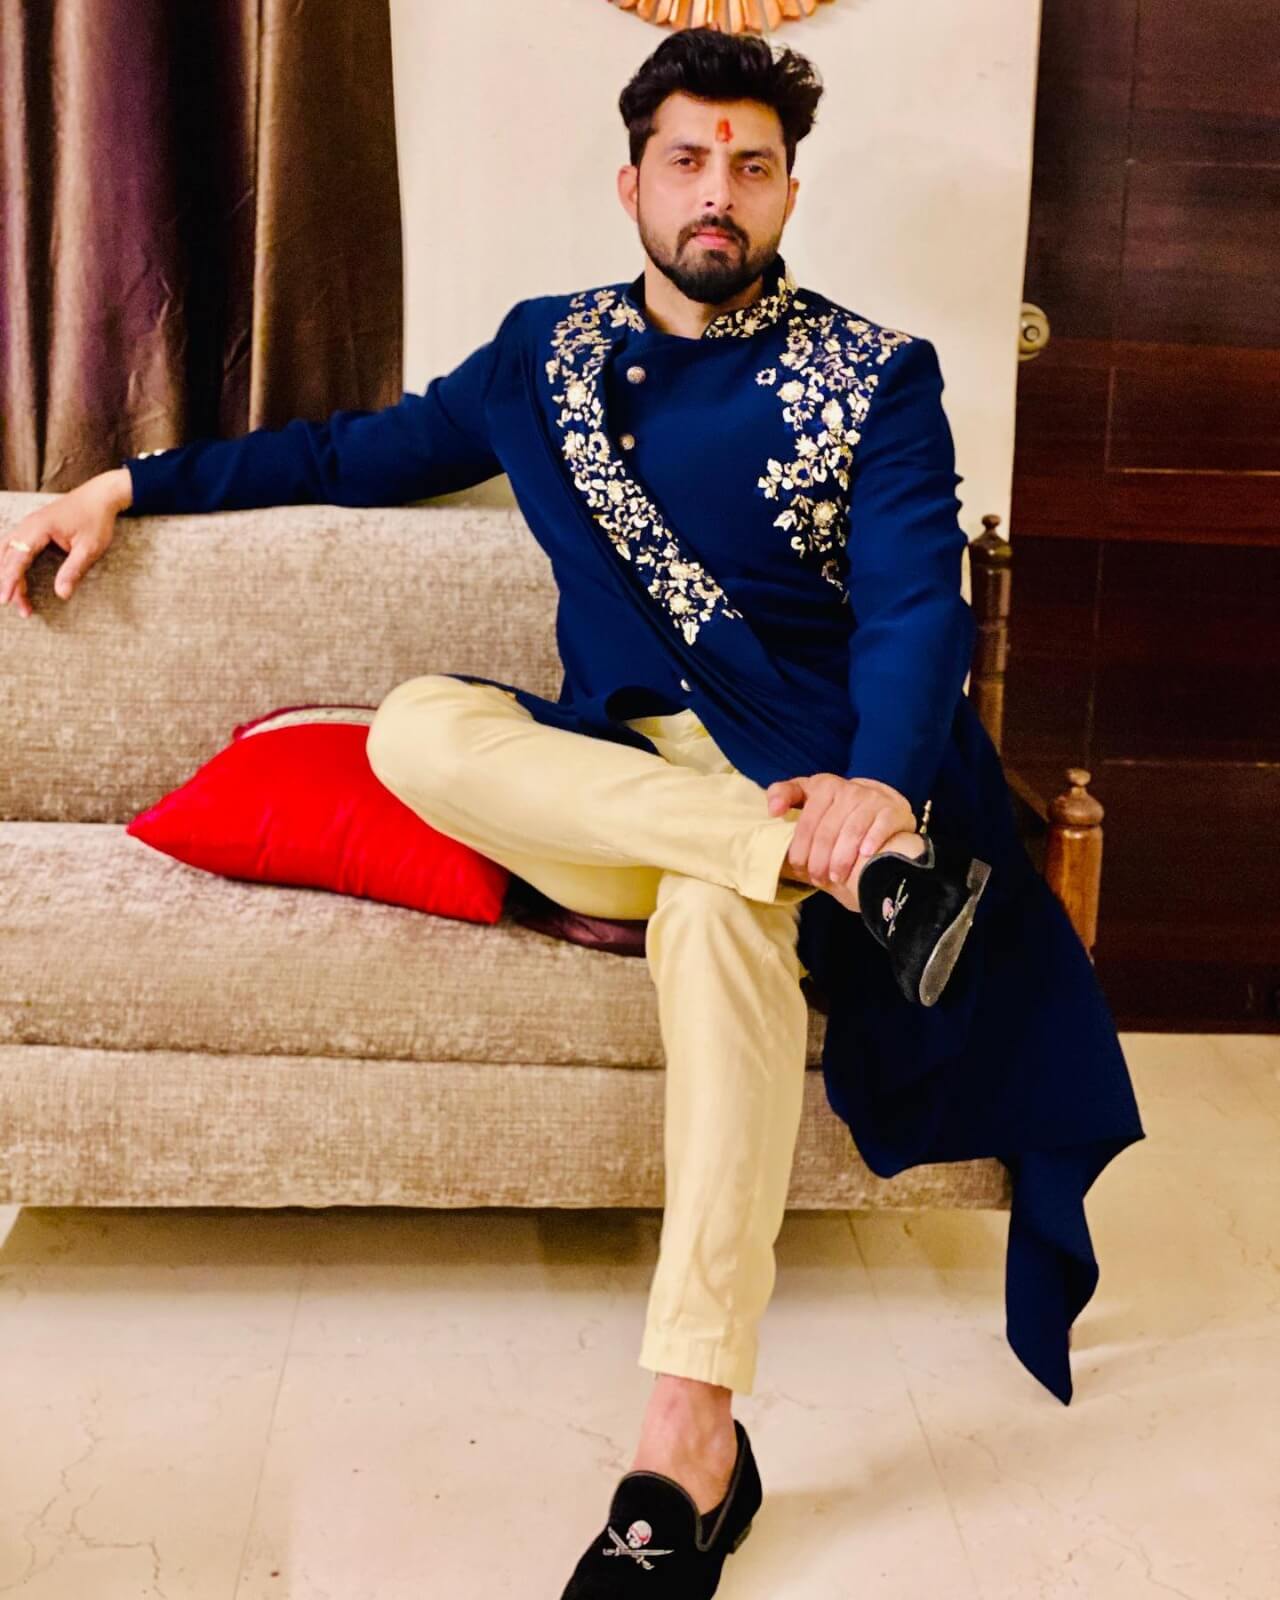 See the unique style of Dinesh Lal Yadav, Ravi Kishan and Vikrant Singh Rajput in Sherwani 3580